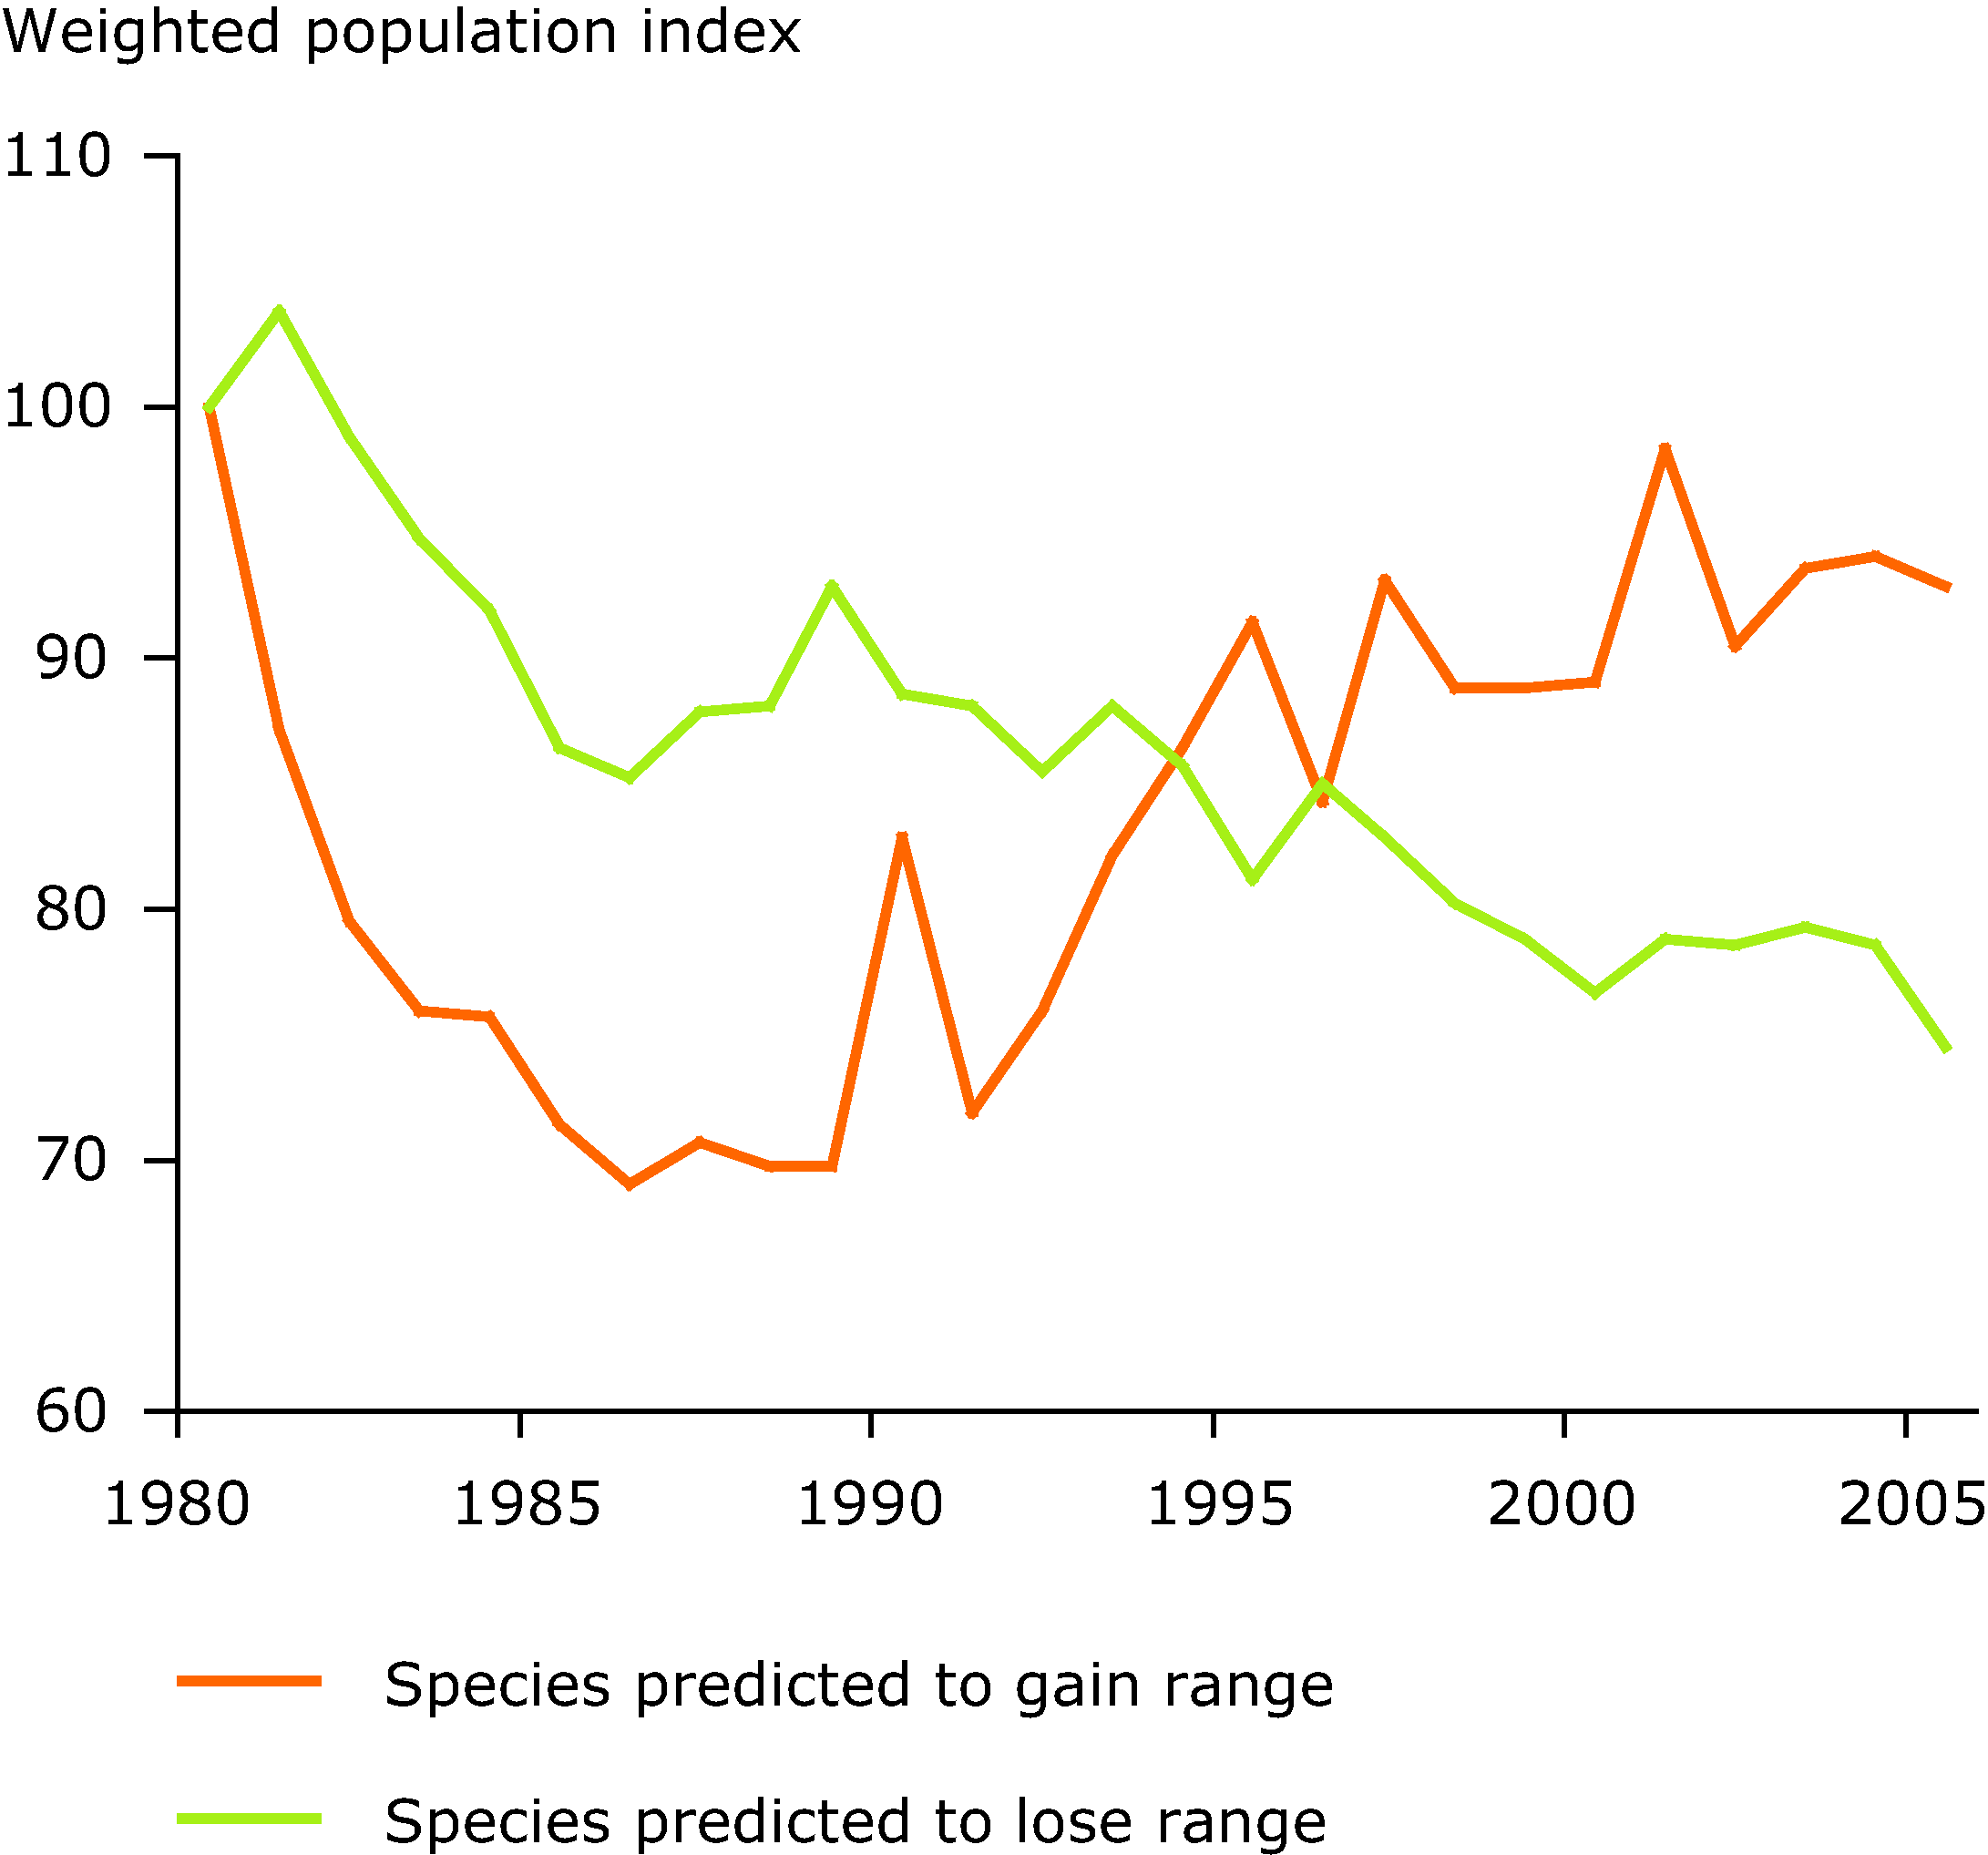 Impact of climate change on populations of European birds, 1980-2005